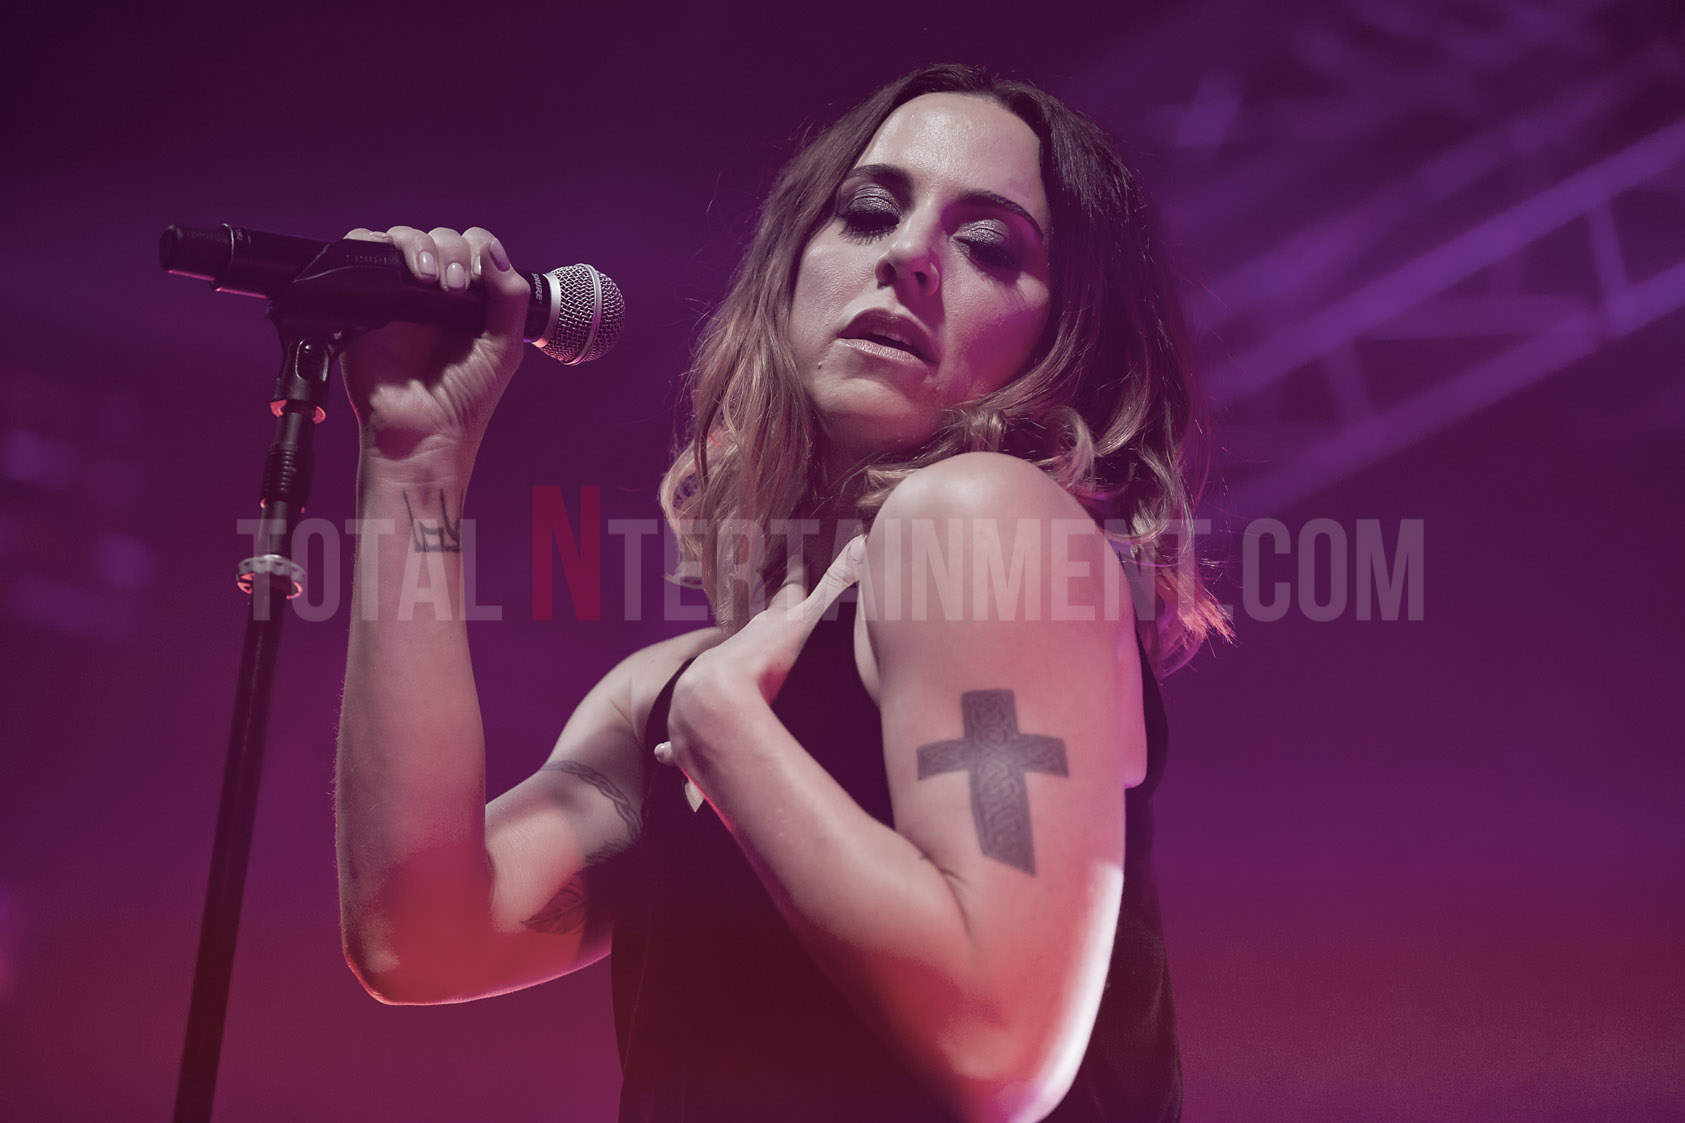 Mel C comes to the Liverpool O2 Academy